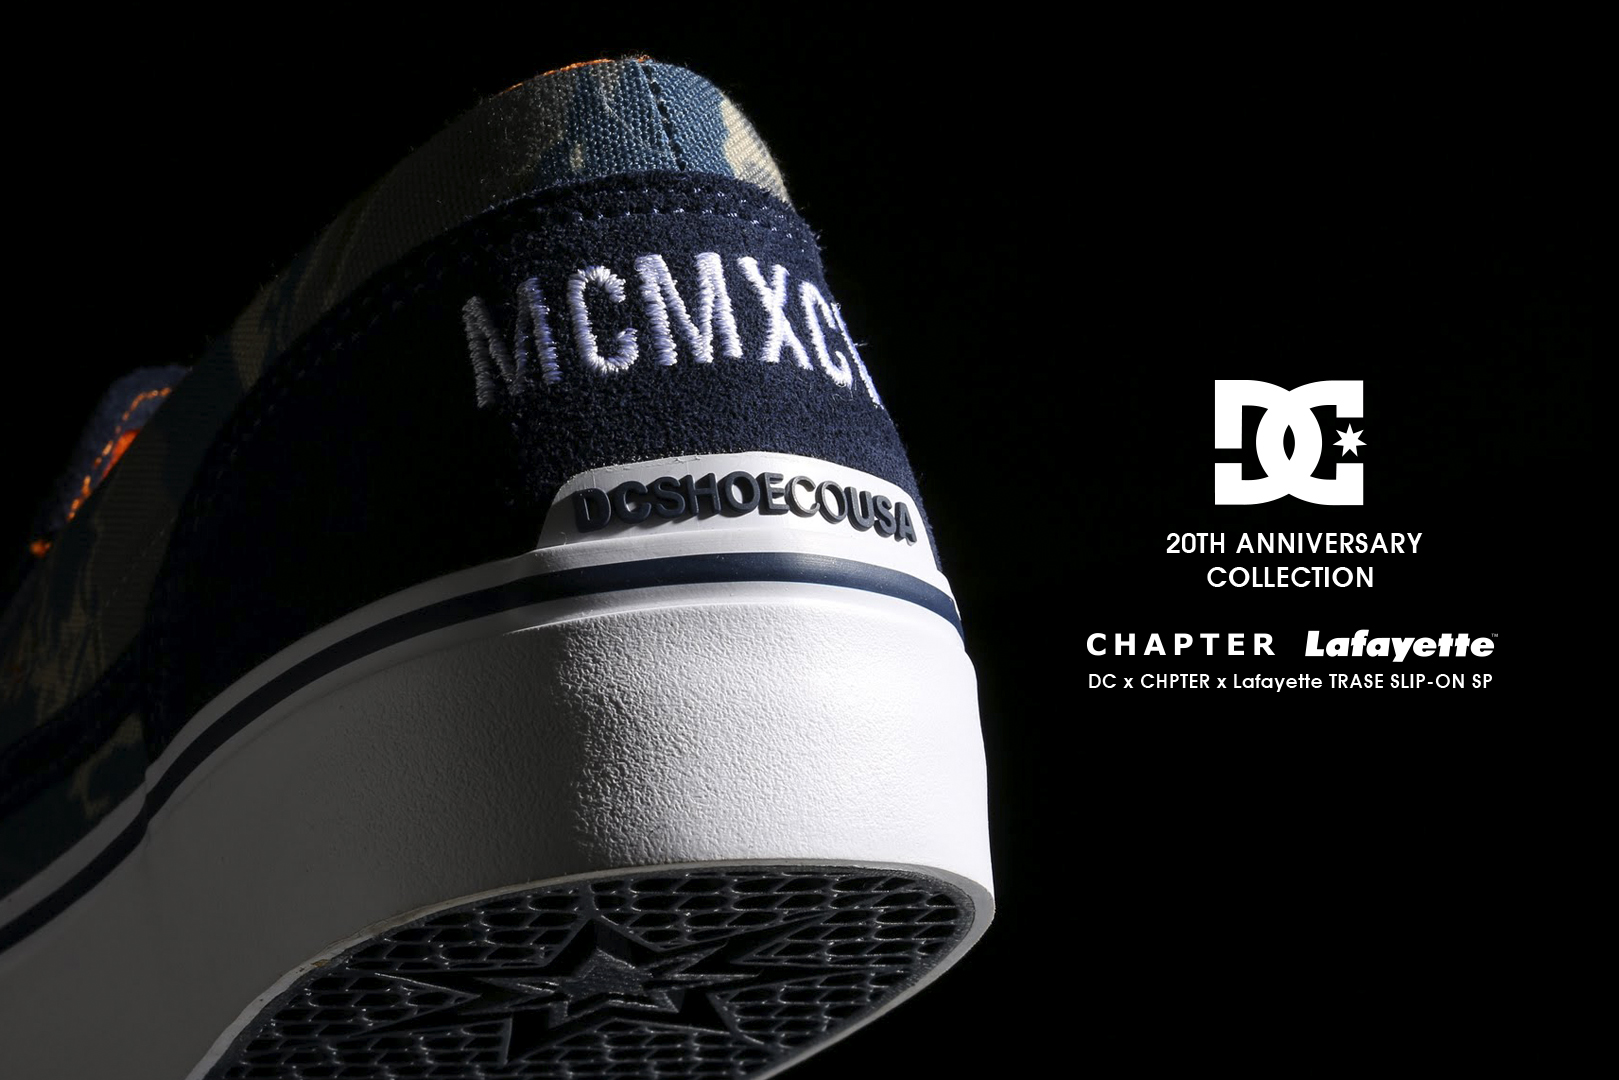 DC shoes × CHAPTER × Lafayette Collaboration Collection